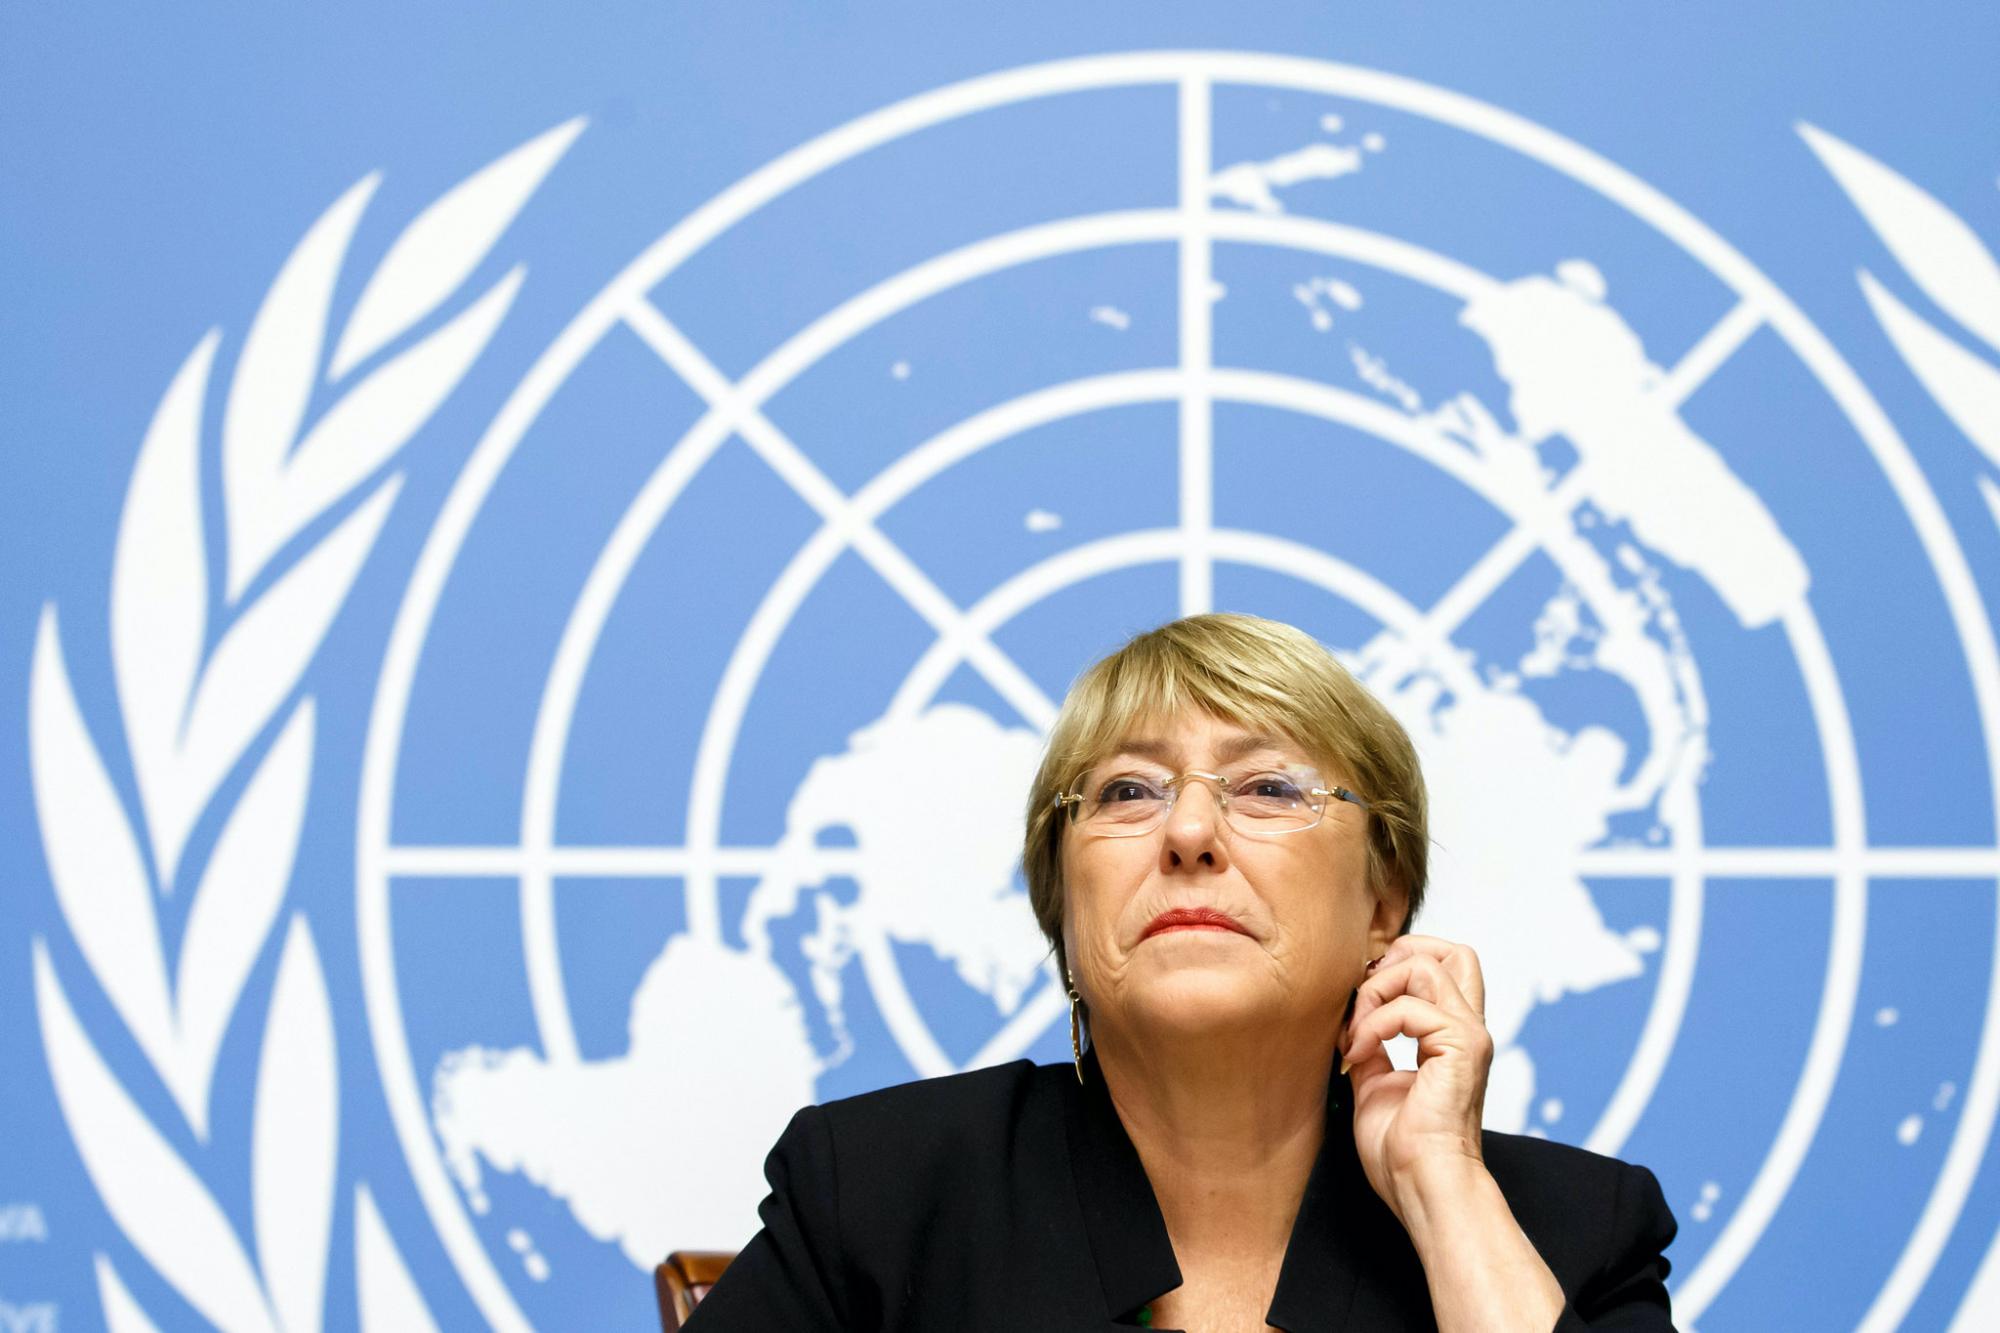 Possible War Crimes Committed in Karabakh, UN Rights Chief Warns